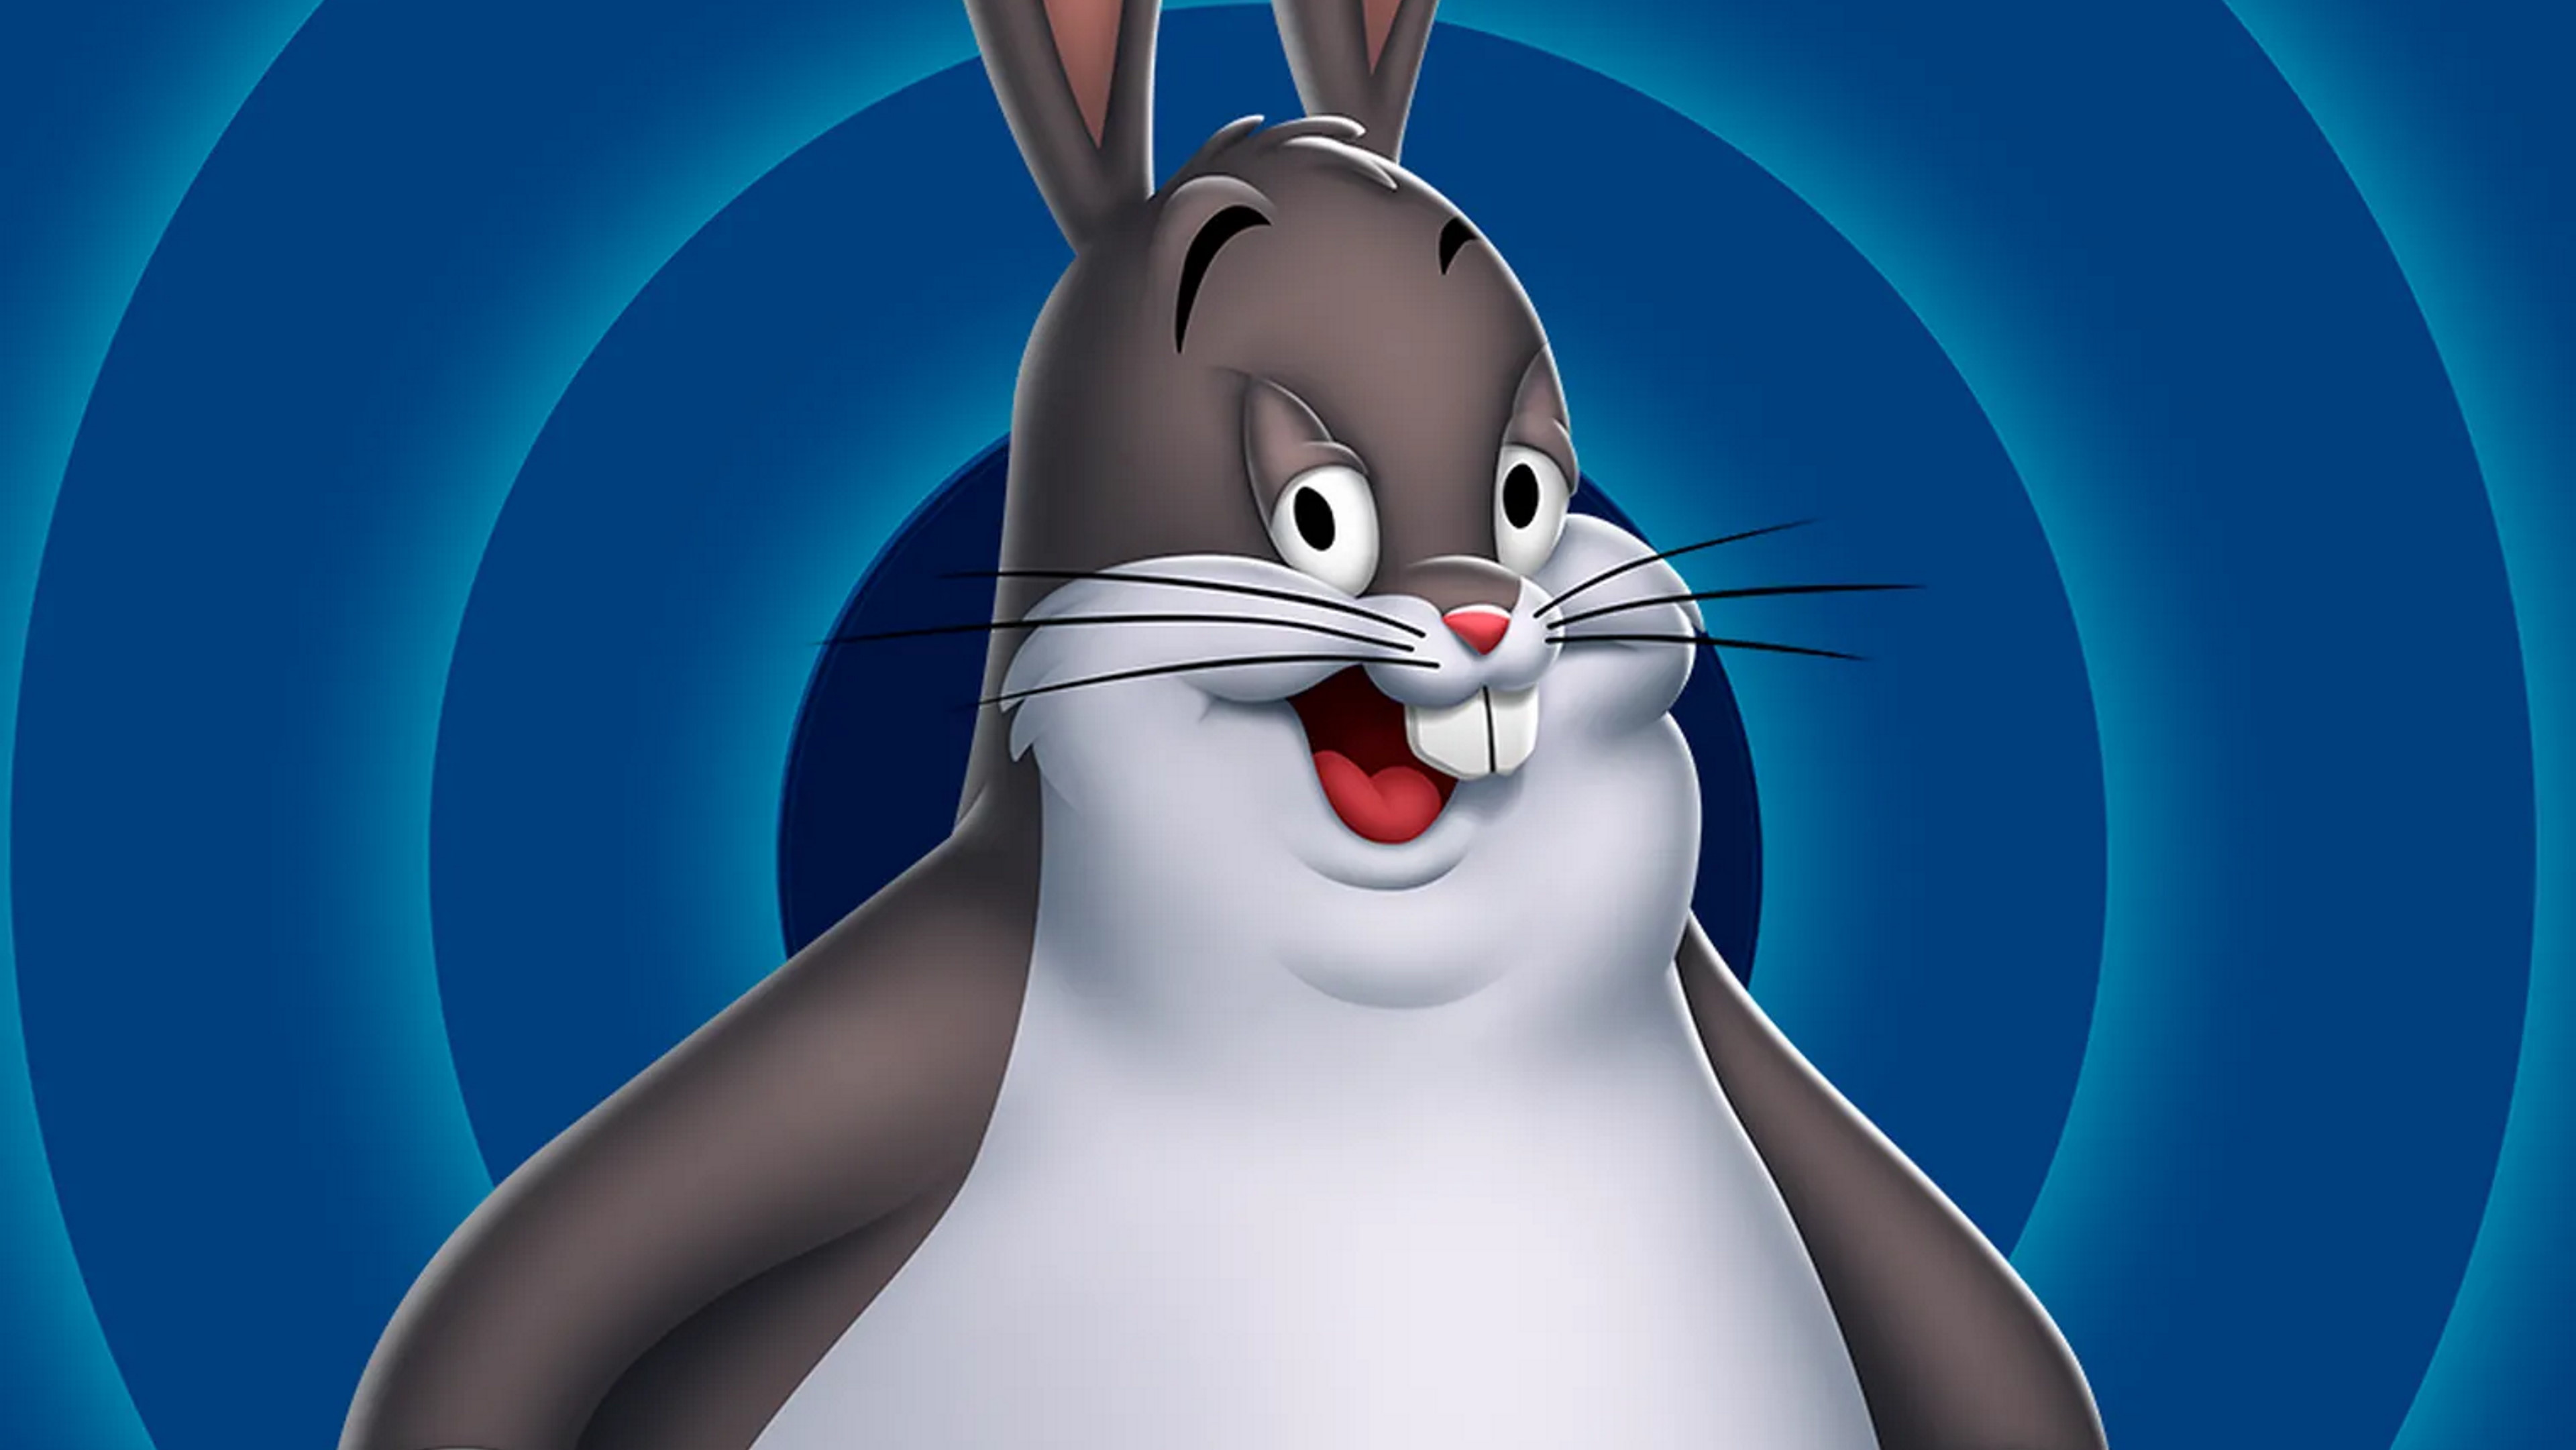  Big Chungus may be coming to MultiVersus 